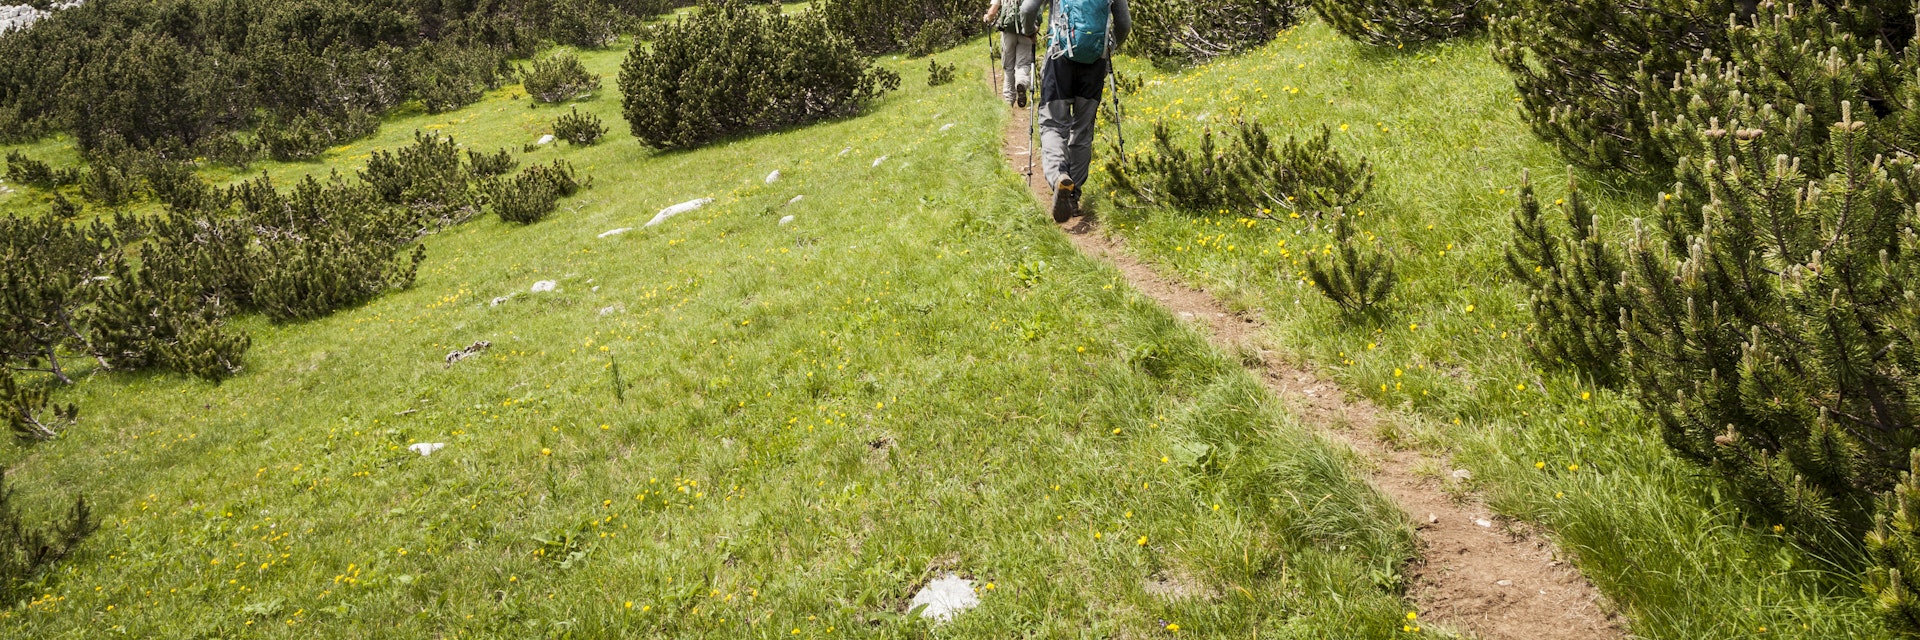 Two hikers in Sutjeska National Park, heading to the Maglic Massif, Bosnia and Herzegovina